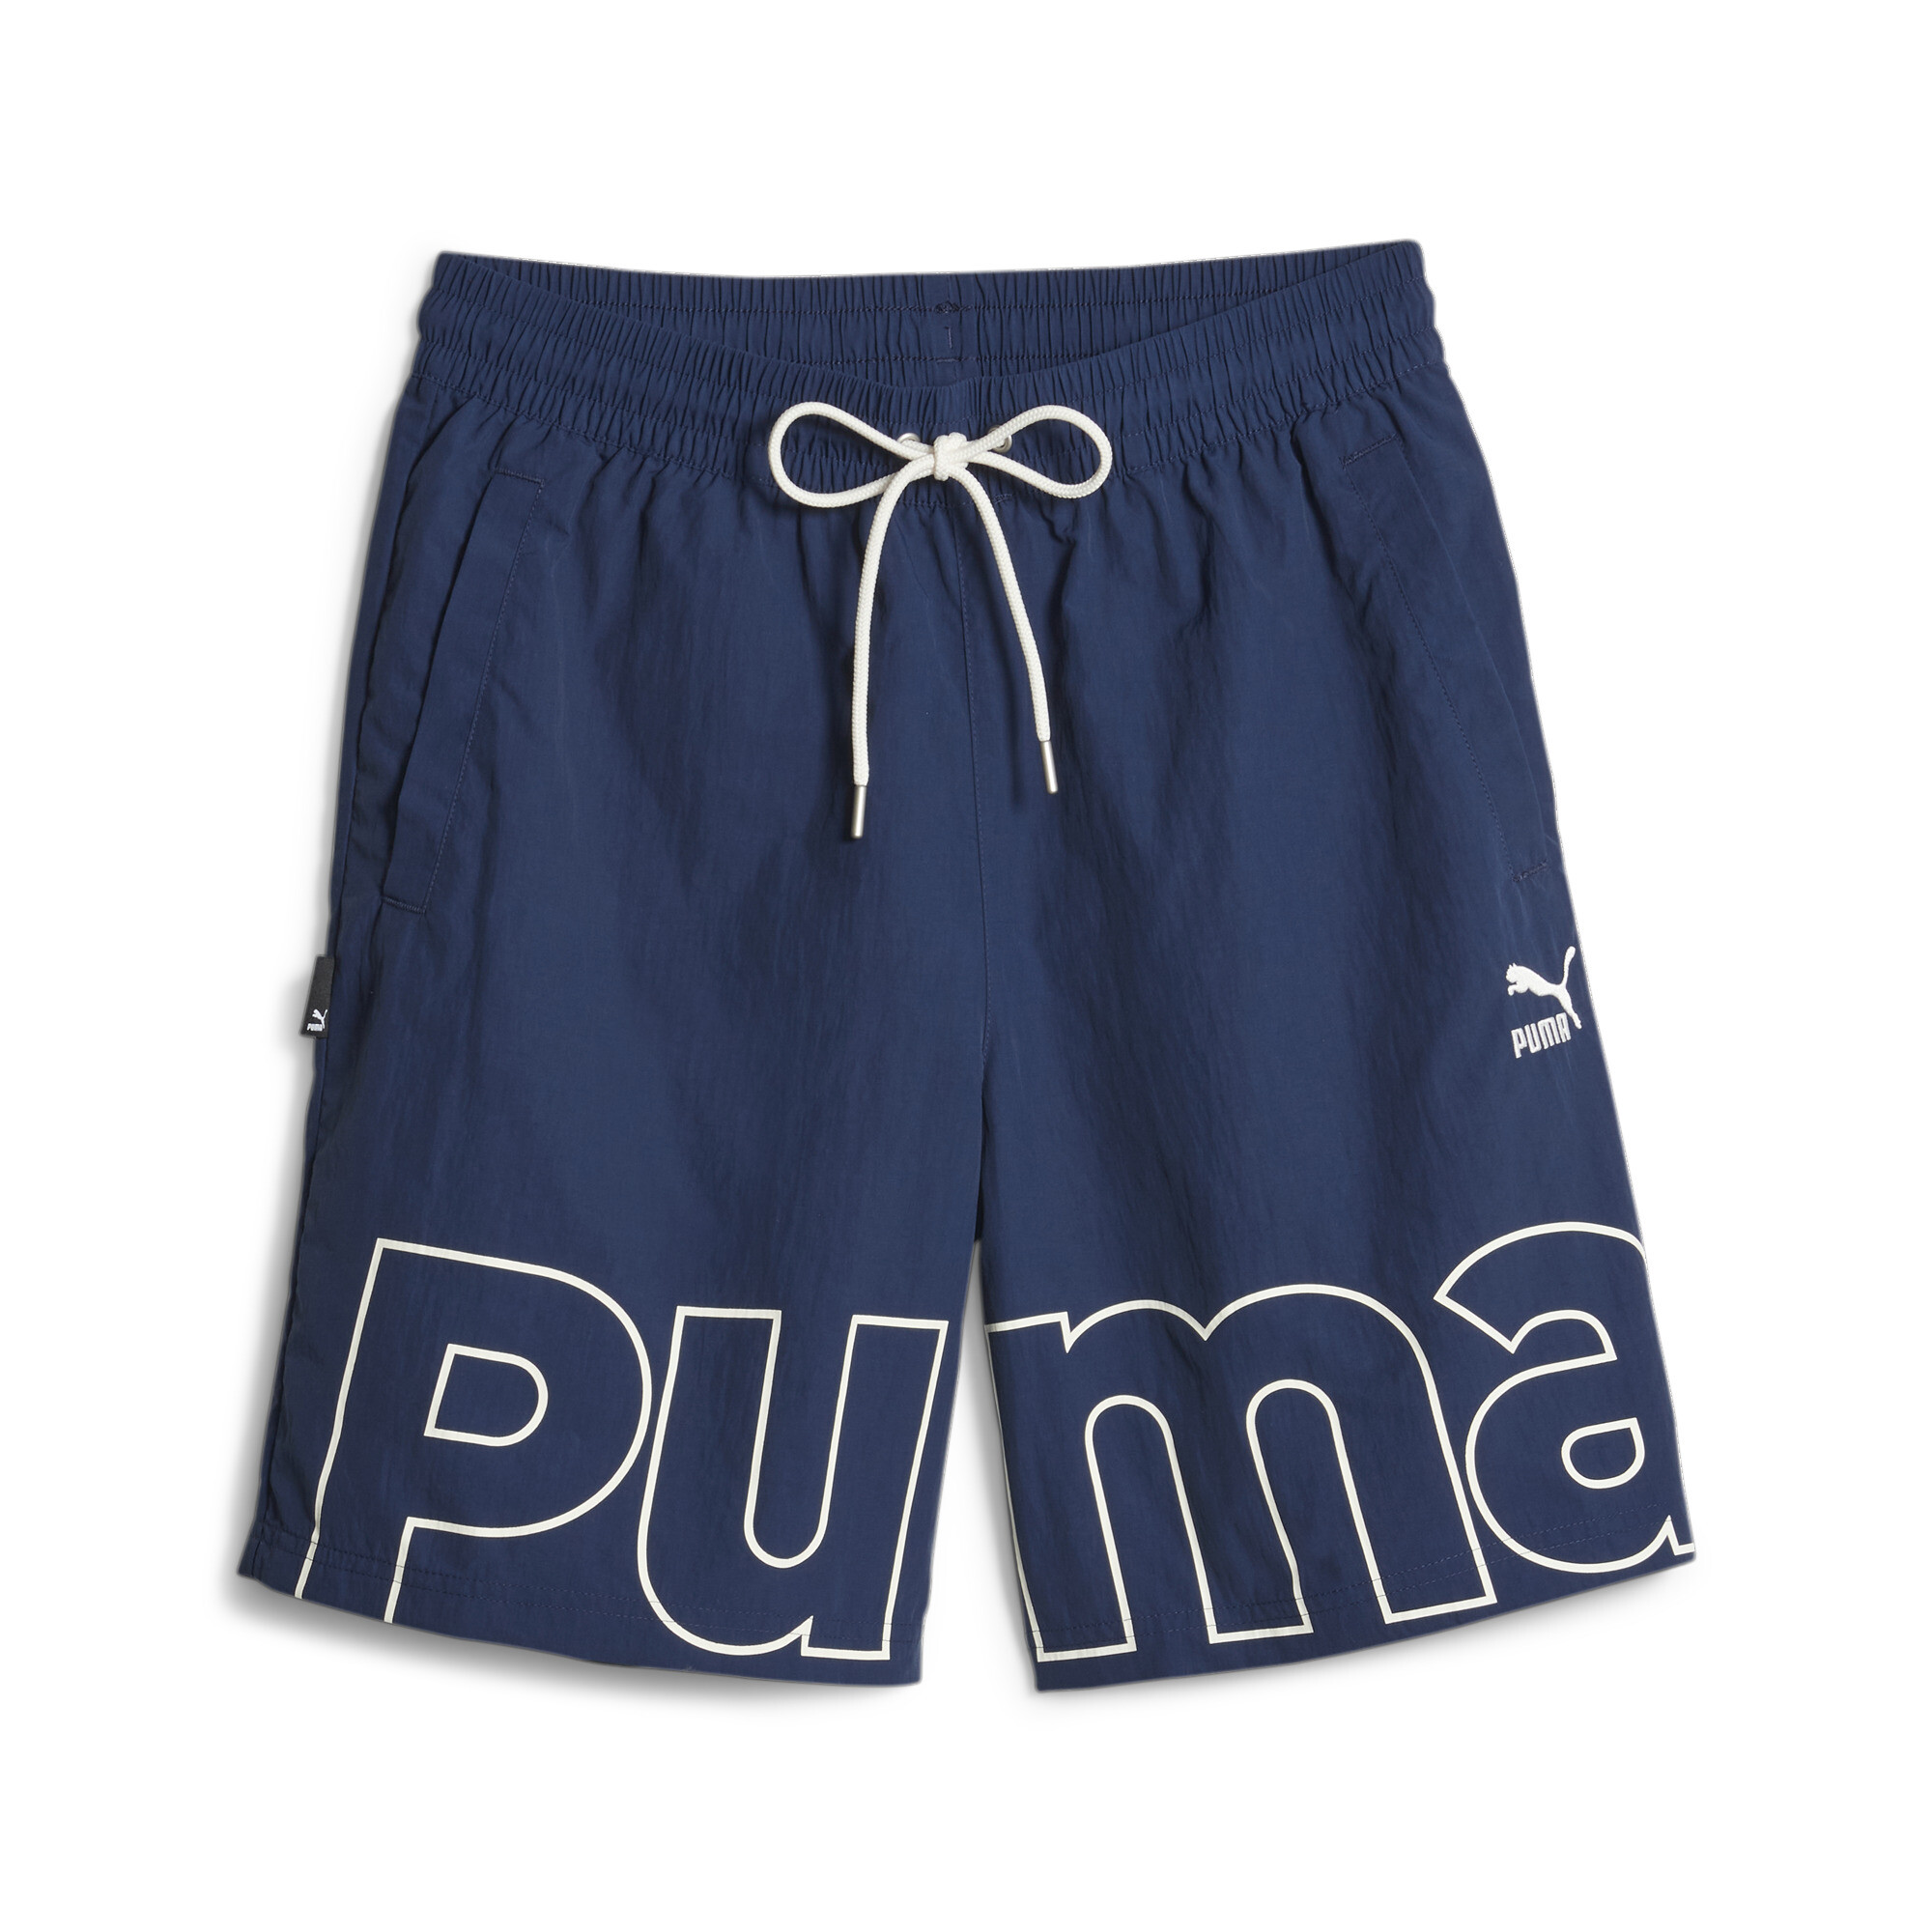 Men's PUMA TEAM Relaxed Shorts In Blue, Size Large